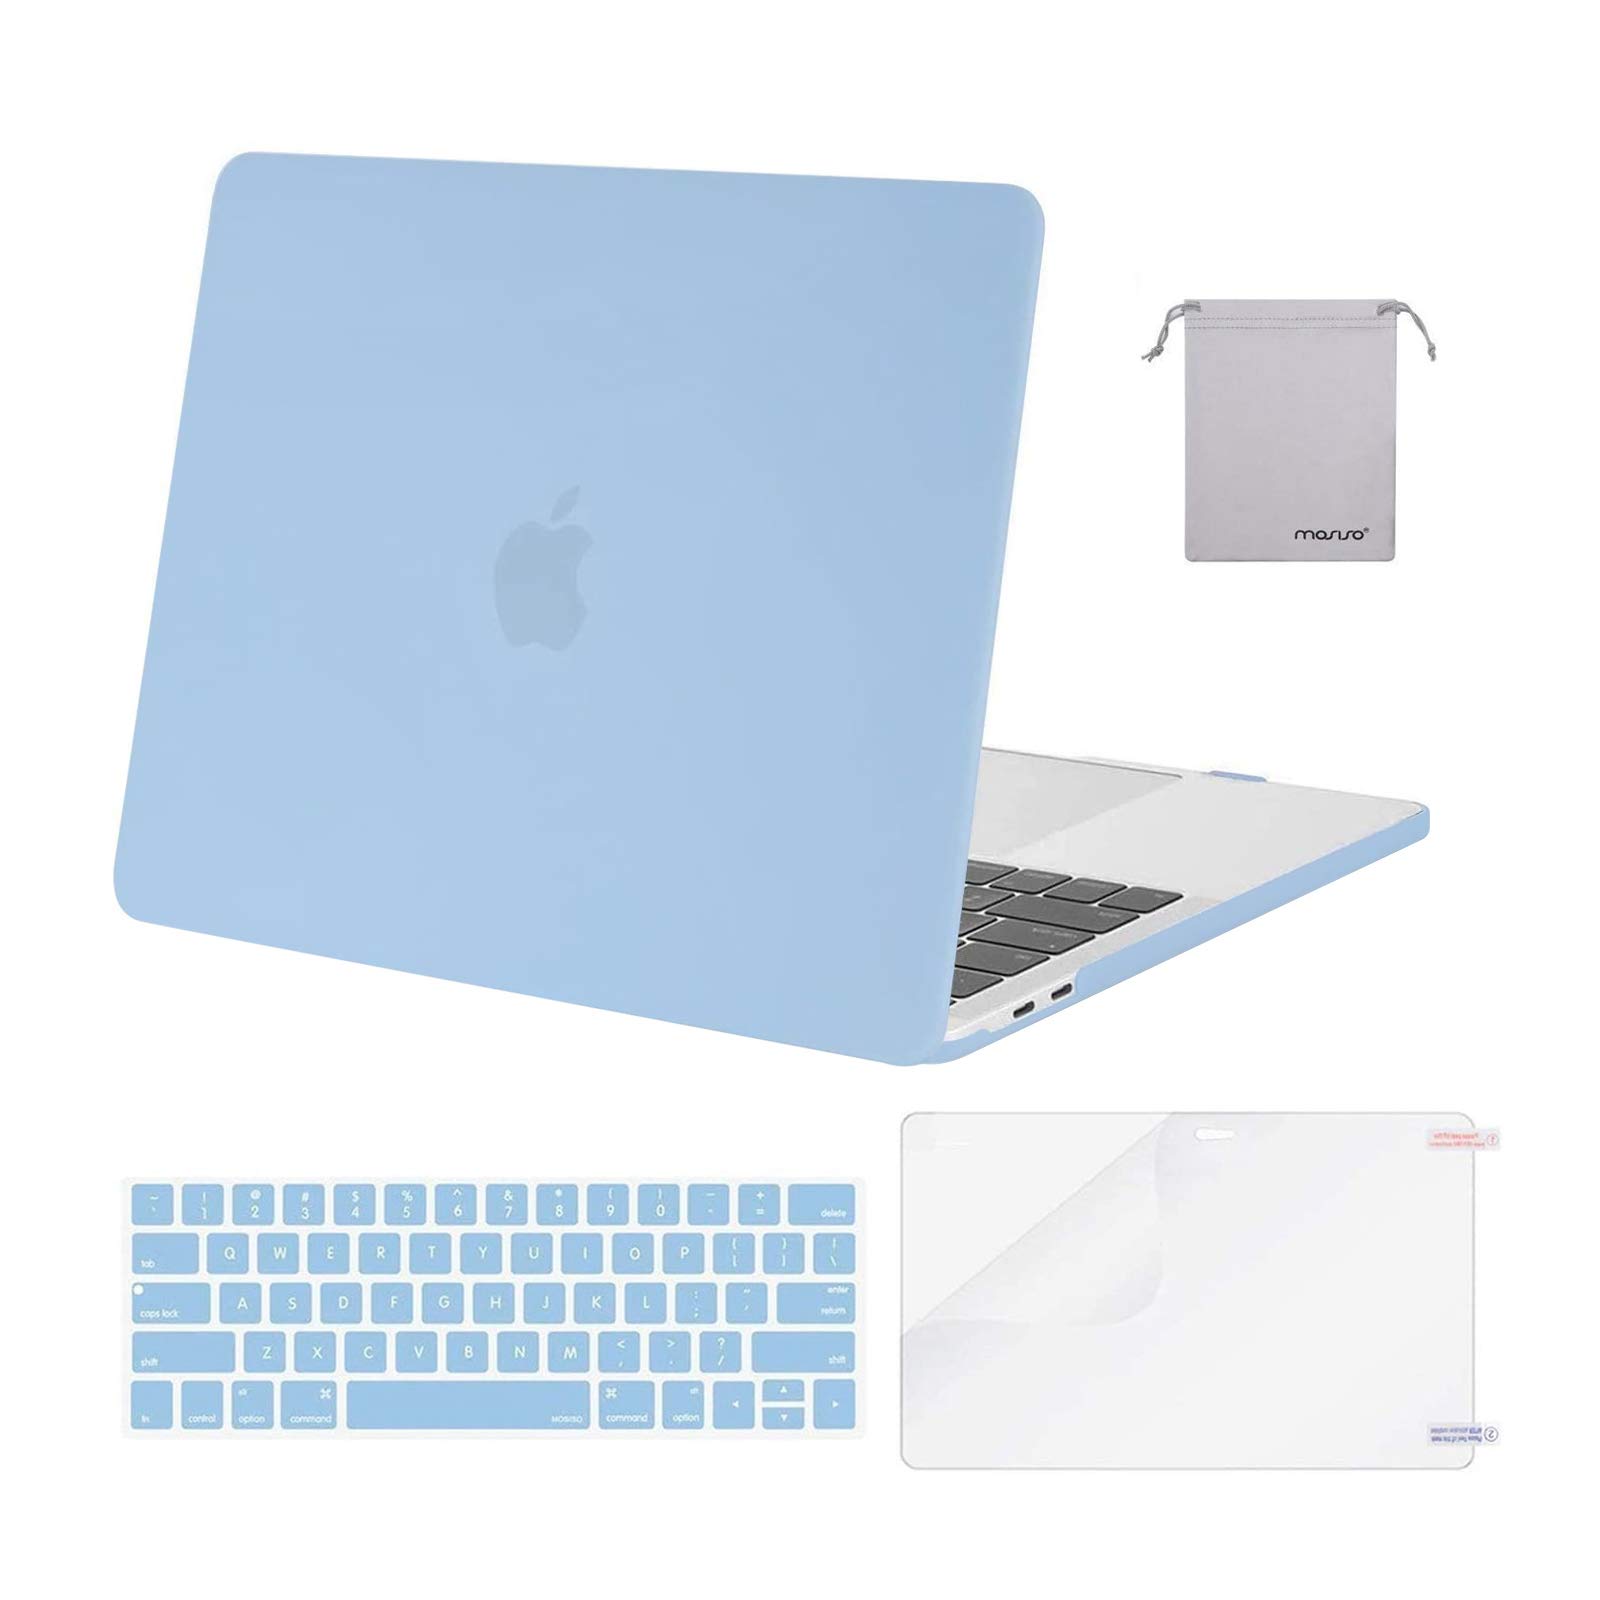 MOSISO MacBook Pro 13 Case 2019 2018 2017 2016 Release A1989 A1706 A1708 Plastic Hard Shell & Keyboard Cover & Screen Protector & Storage Bag Compatible Newest MacBook Pro 13 Inch Mint Green 